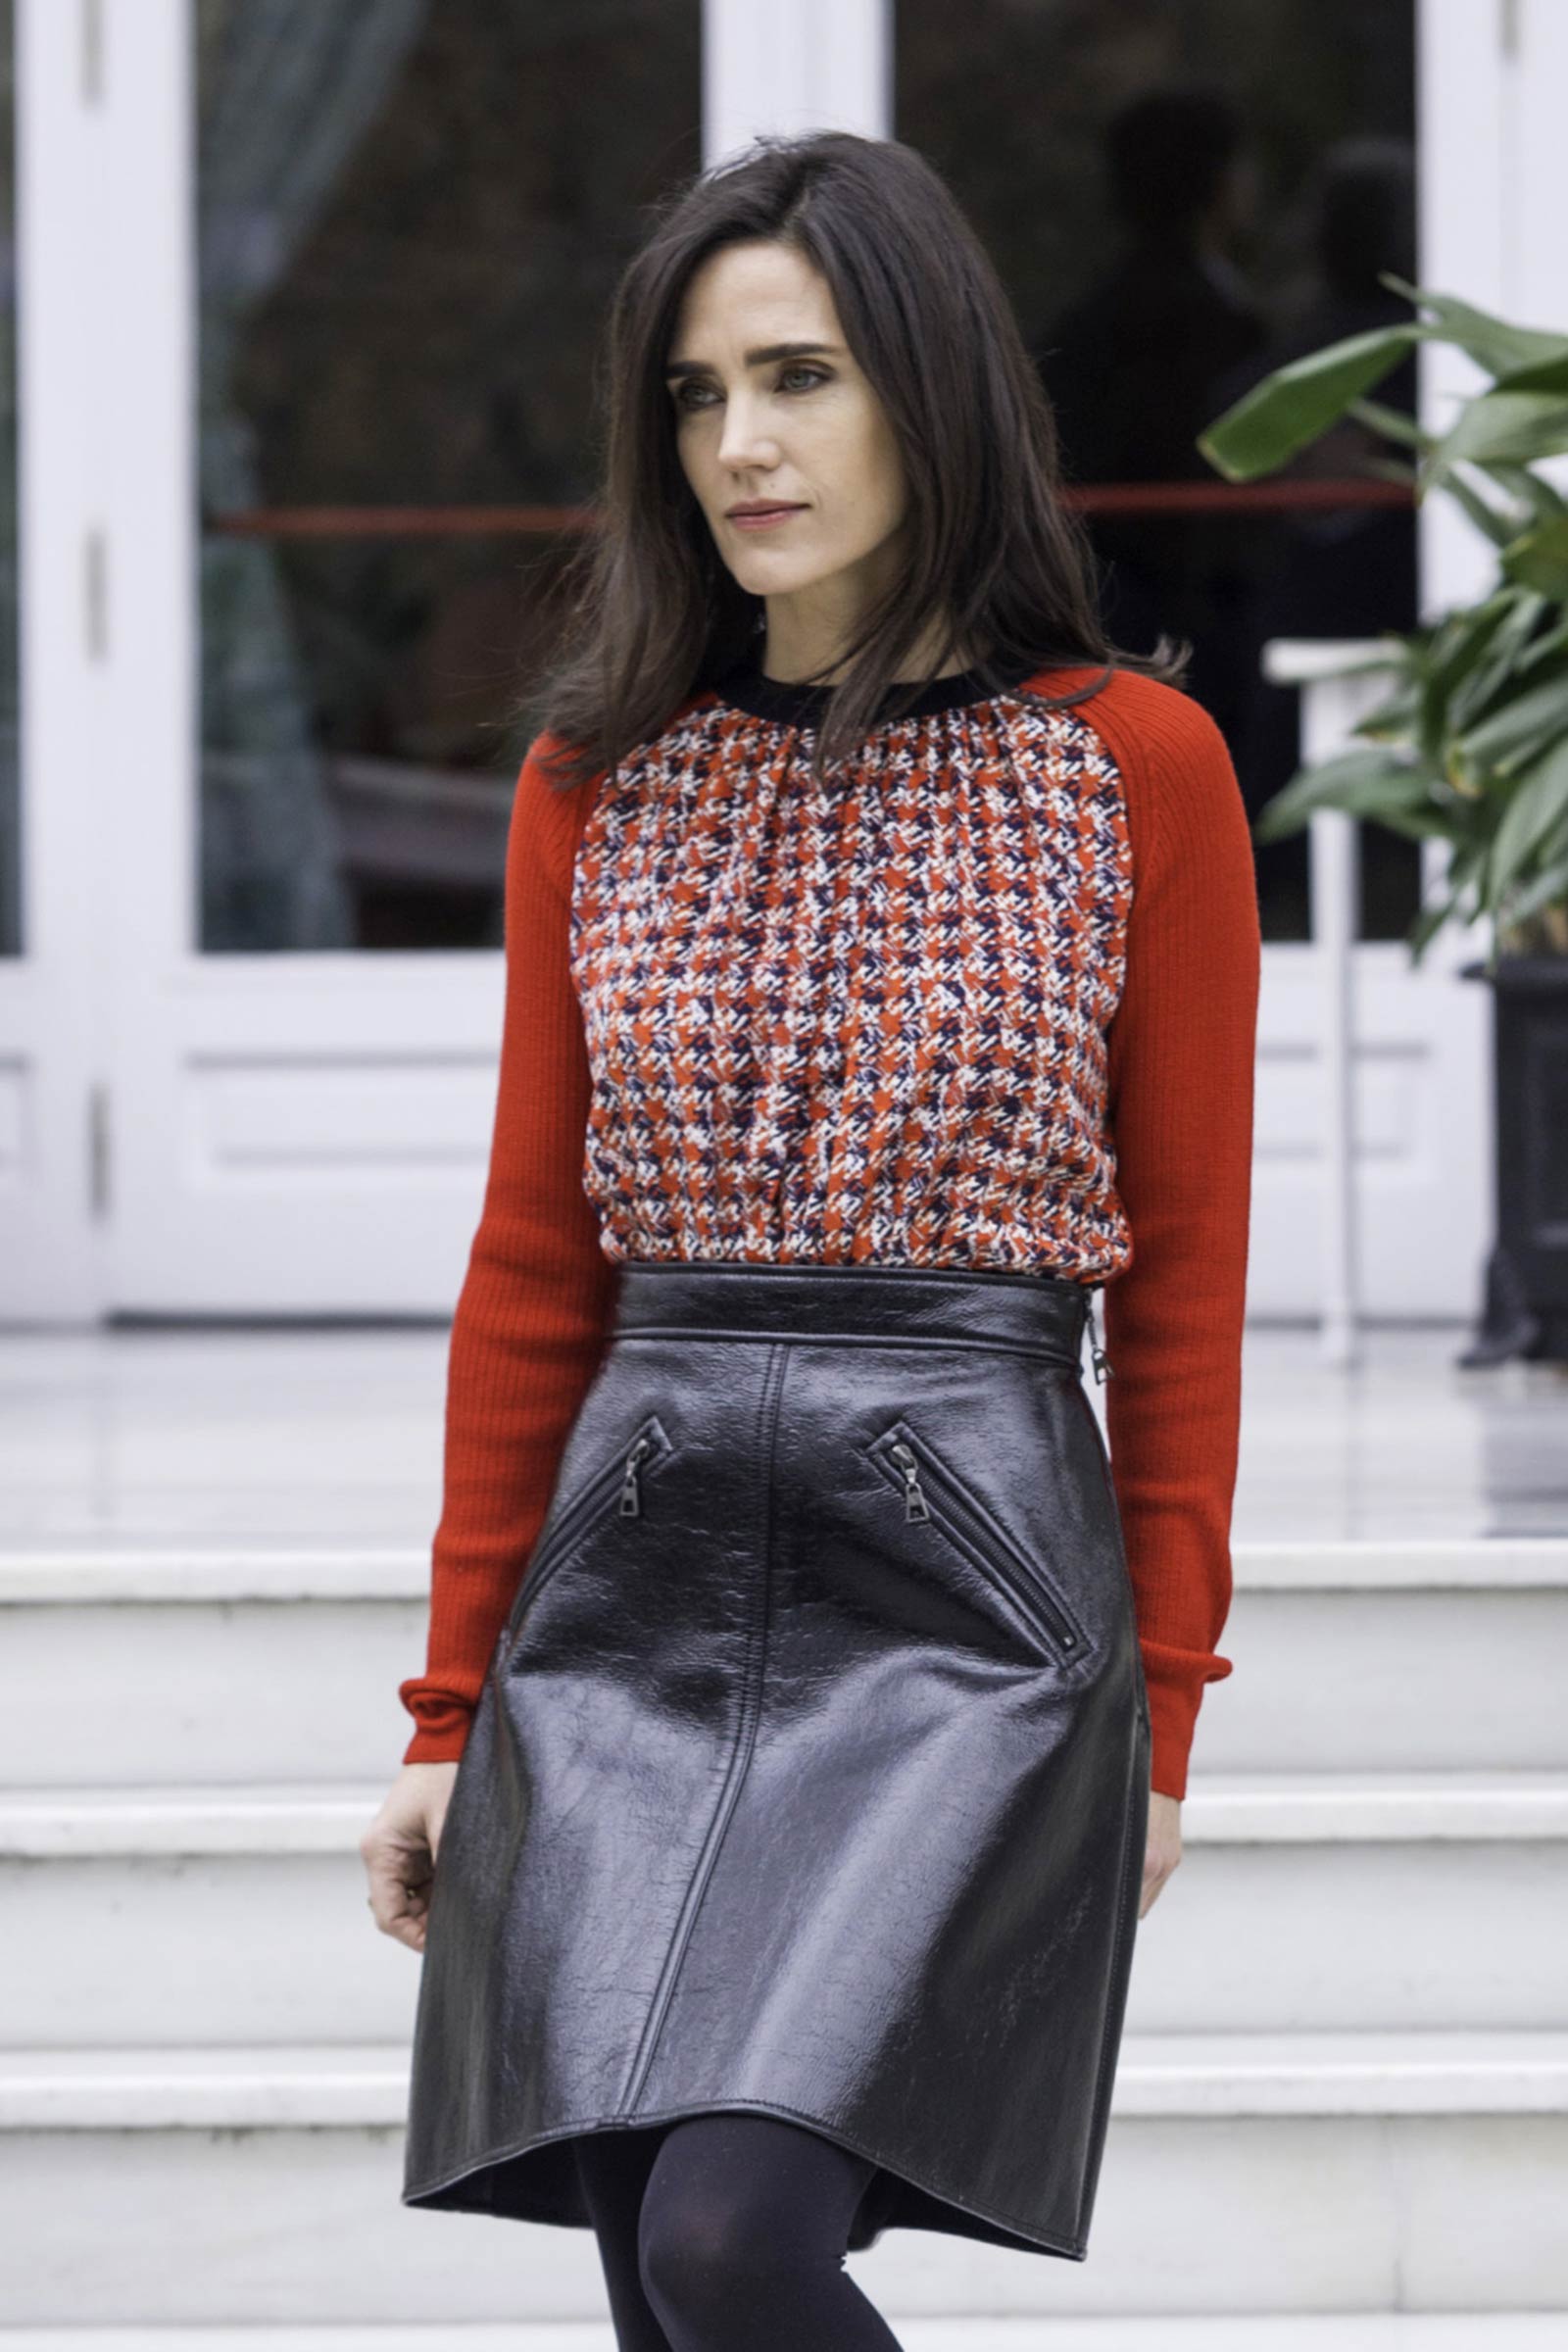 Jennifer Connelly attends Aloft photocall in Madrid